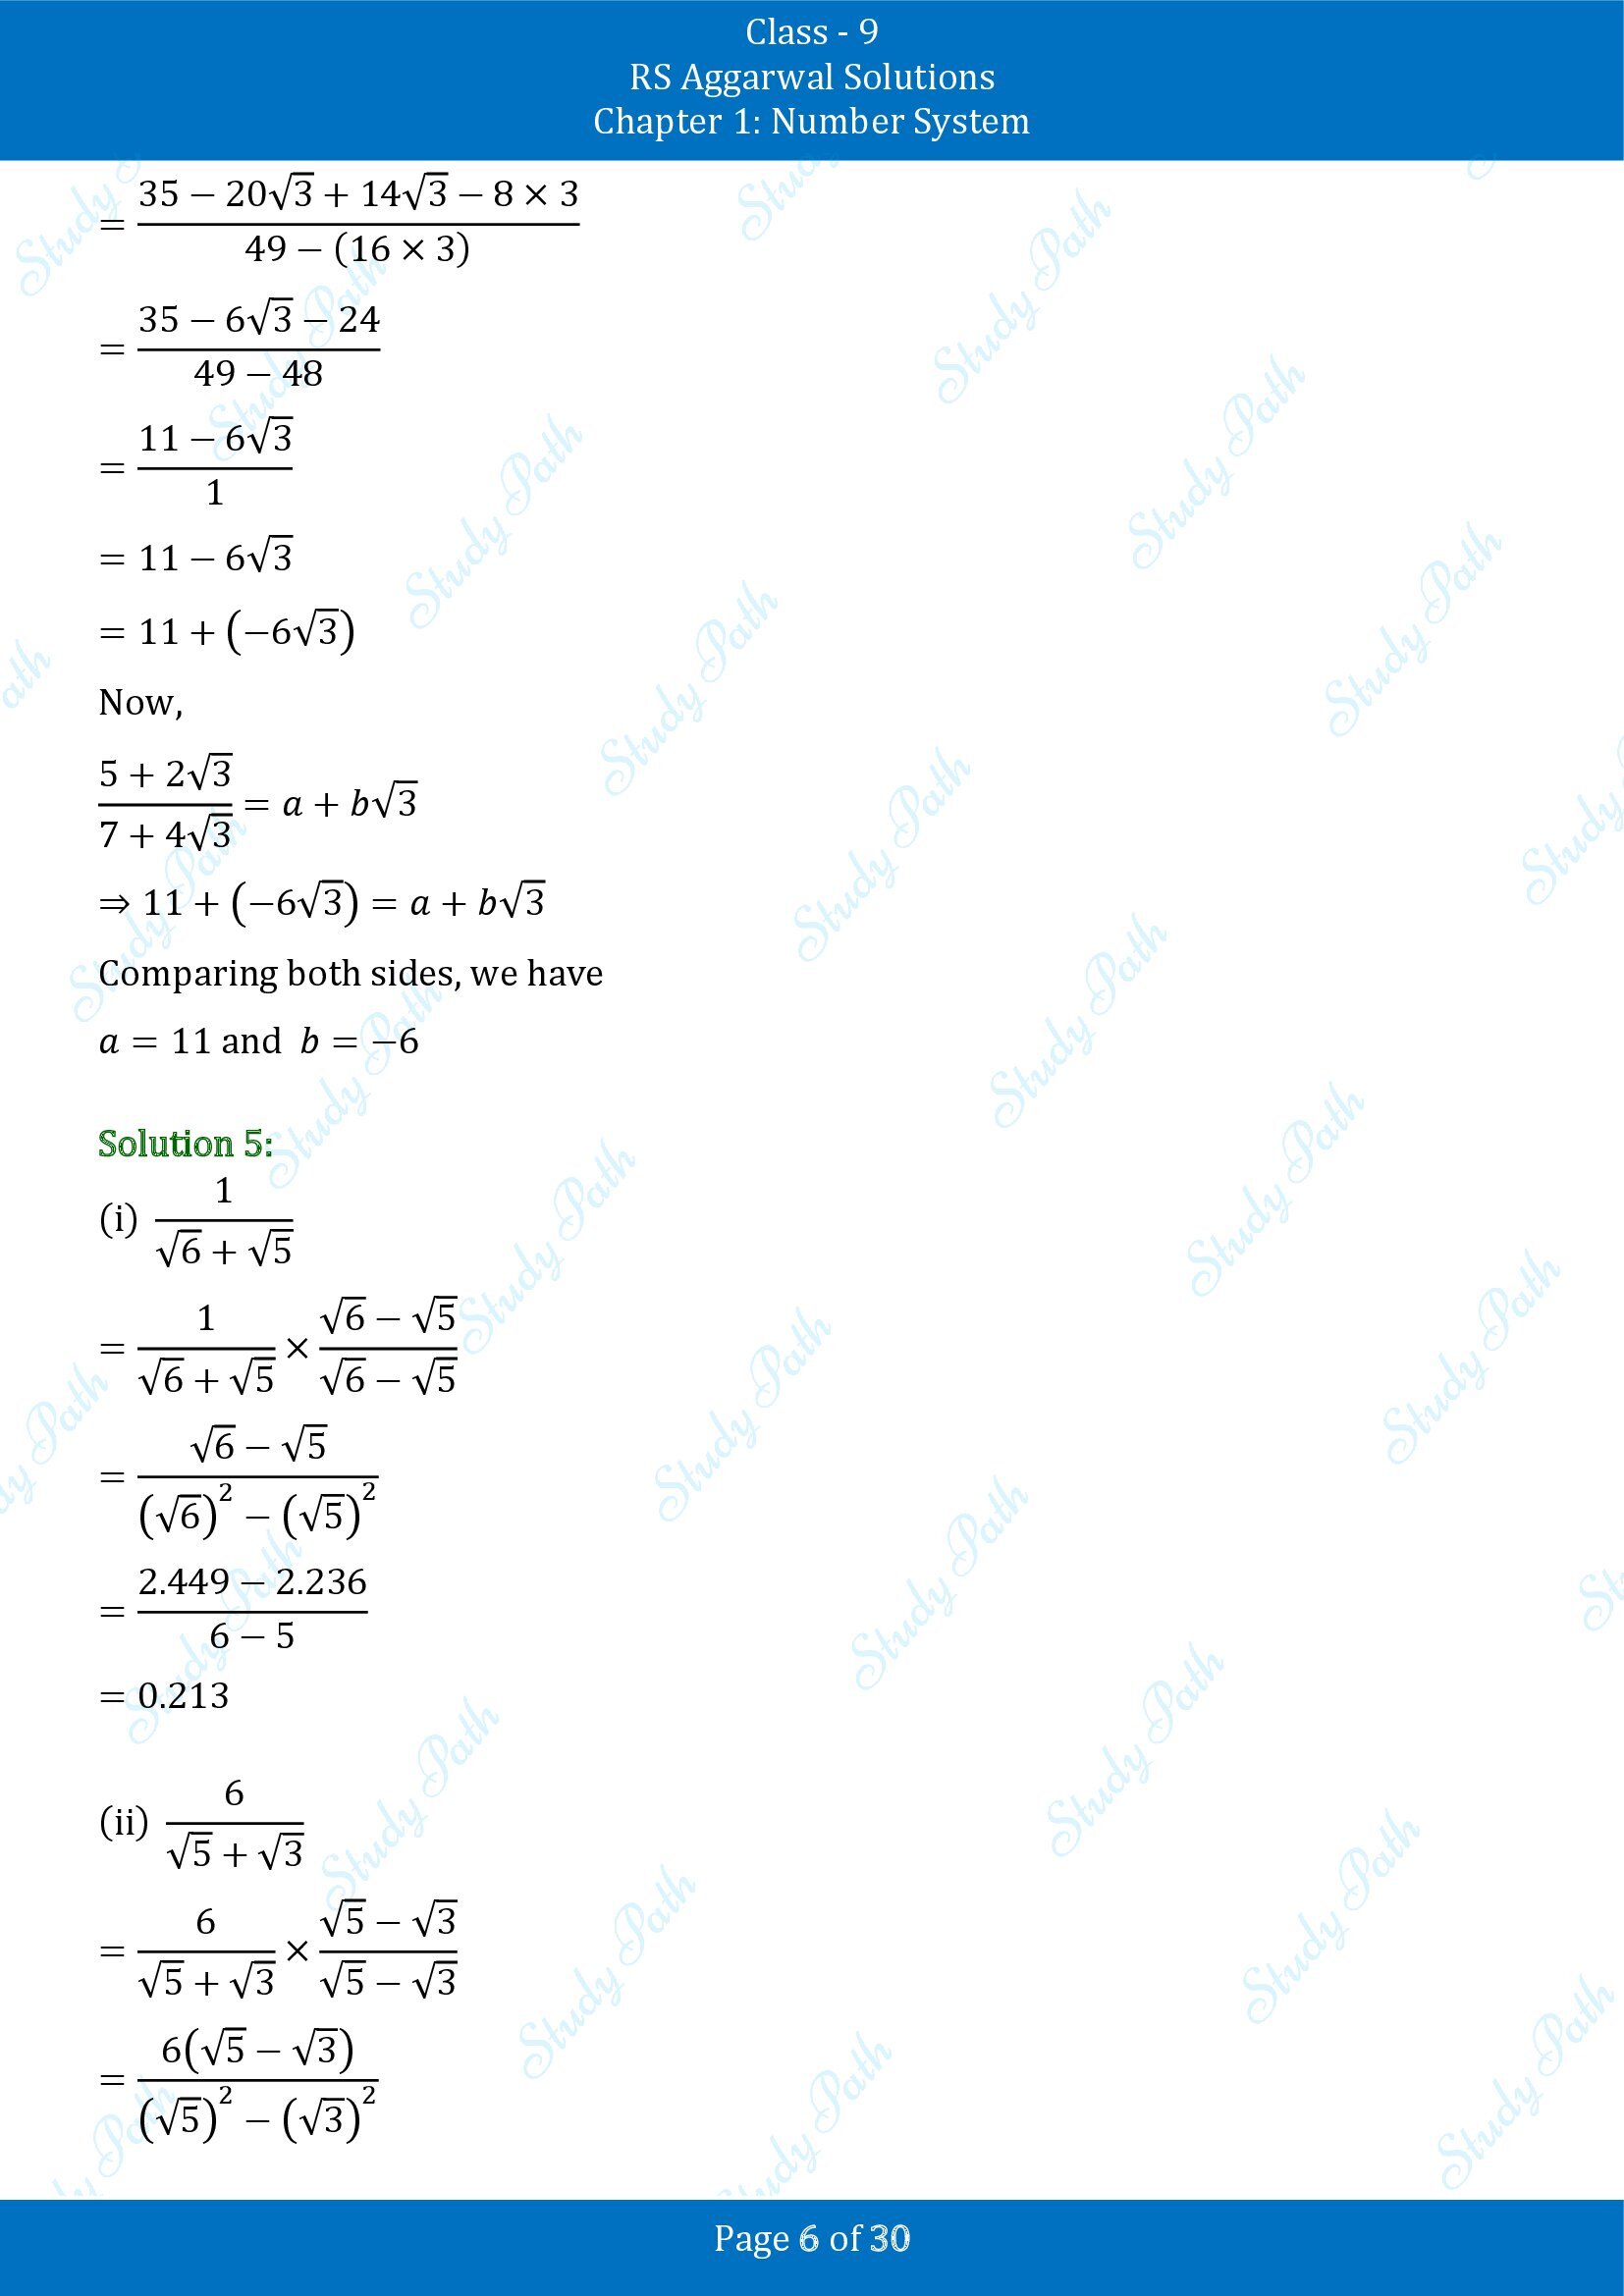 RS Aggarwal Solutions Class 9 Chapter 1 Number System Exercise 1F 00006